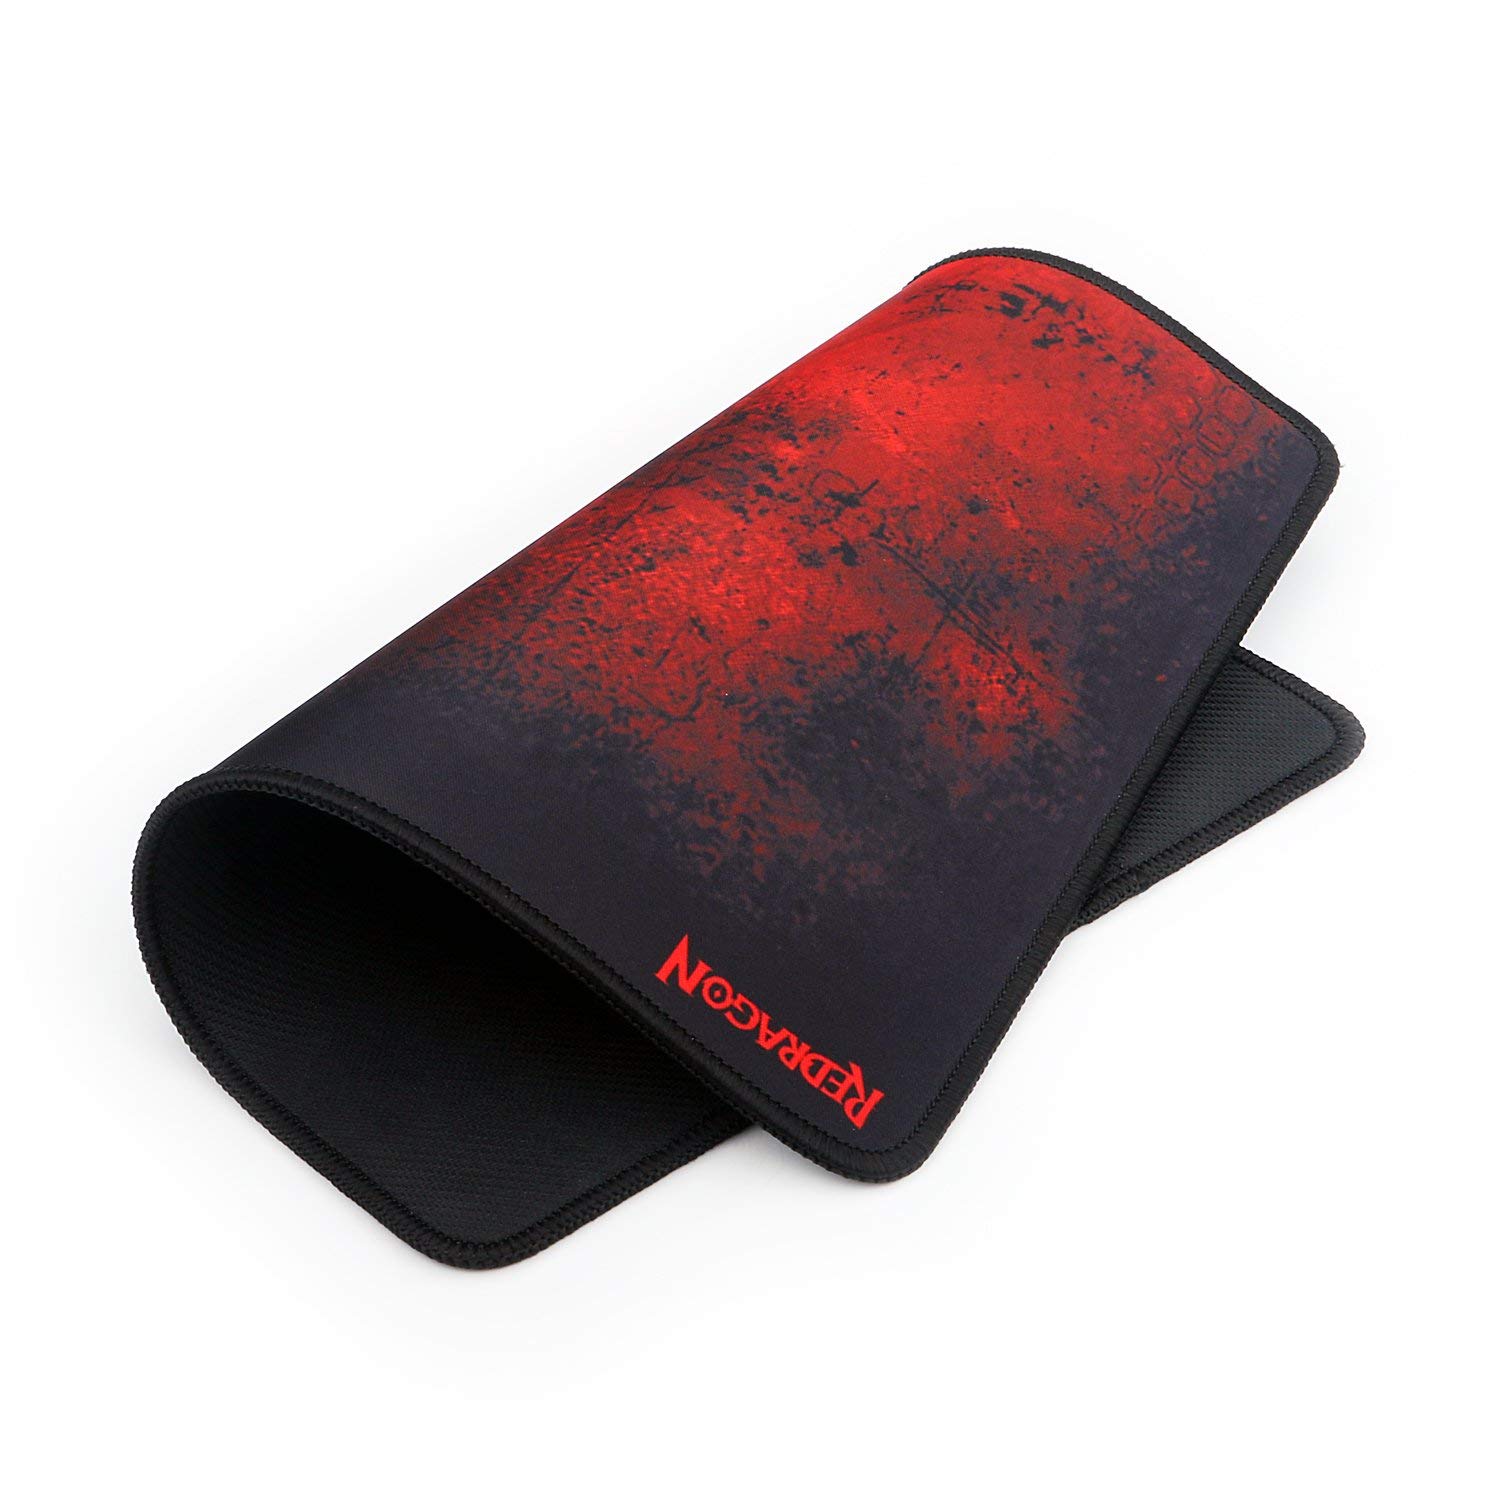 redragon-pisces-gaming-mouse-pad-330x260x3mm-4-image